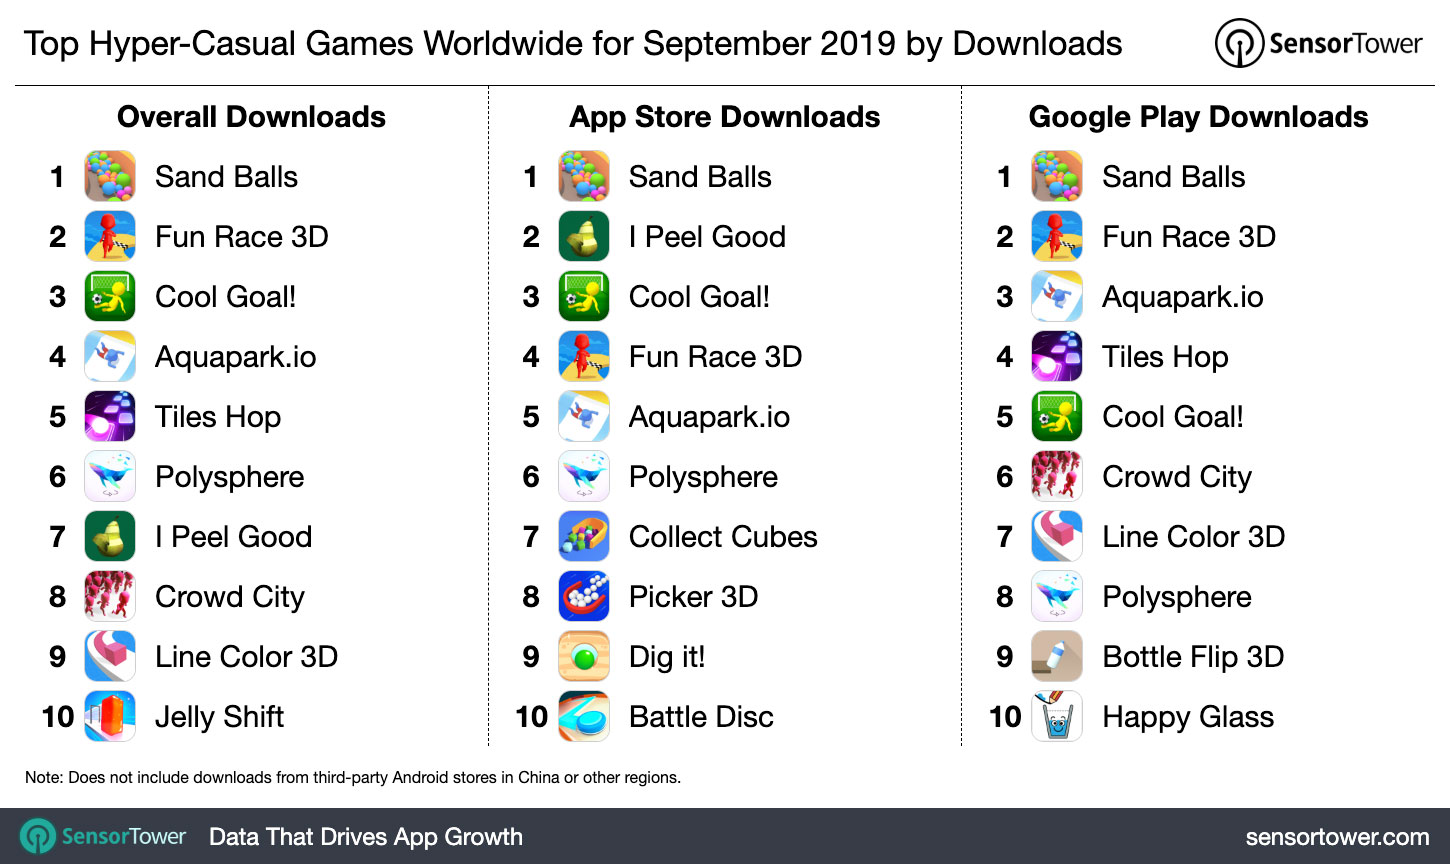 Top Hyper-Casual Games Worldwide for September 2019 by Downloads